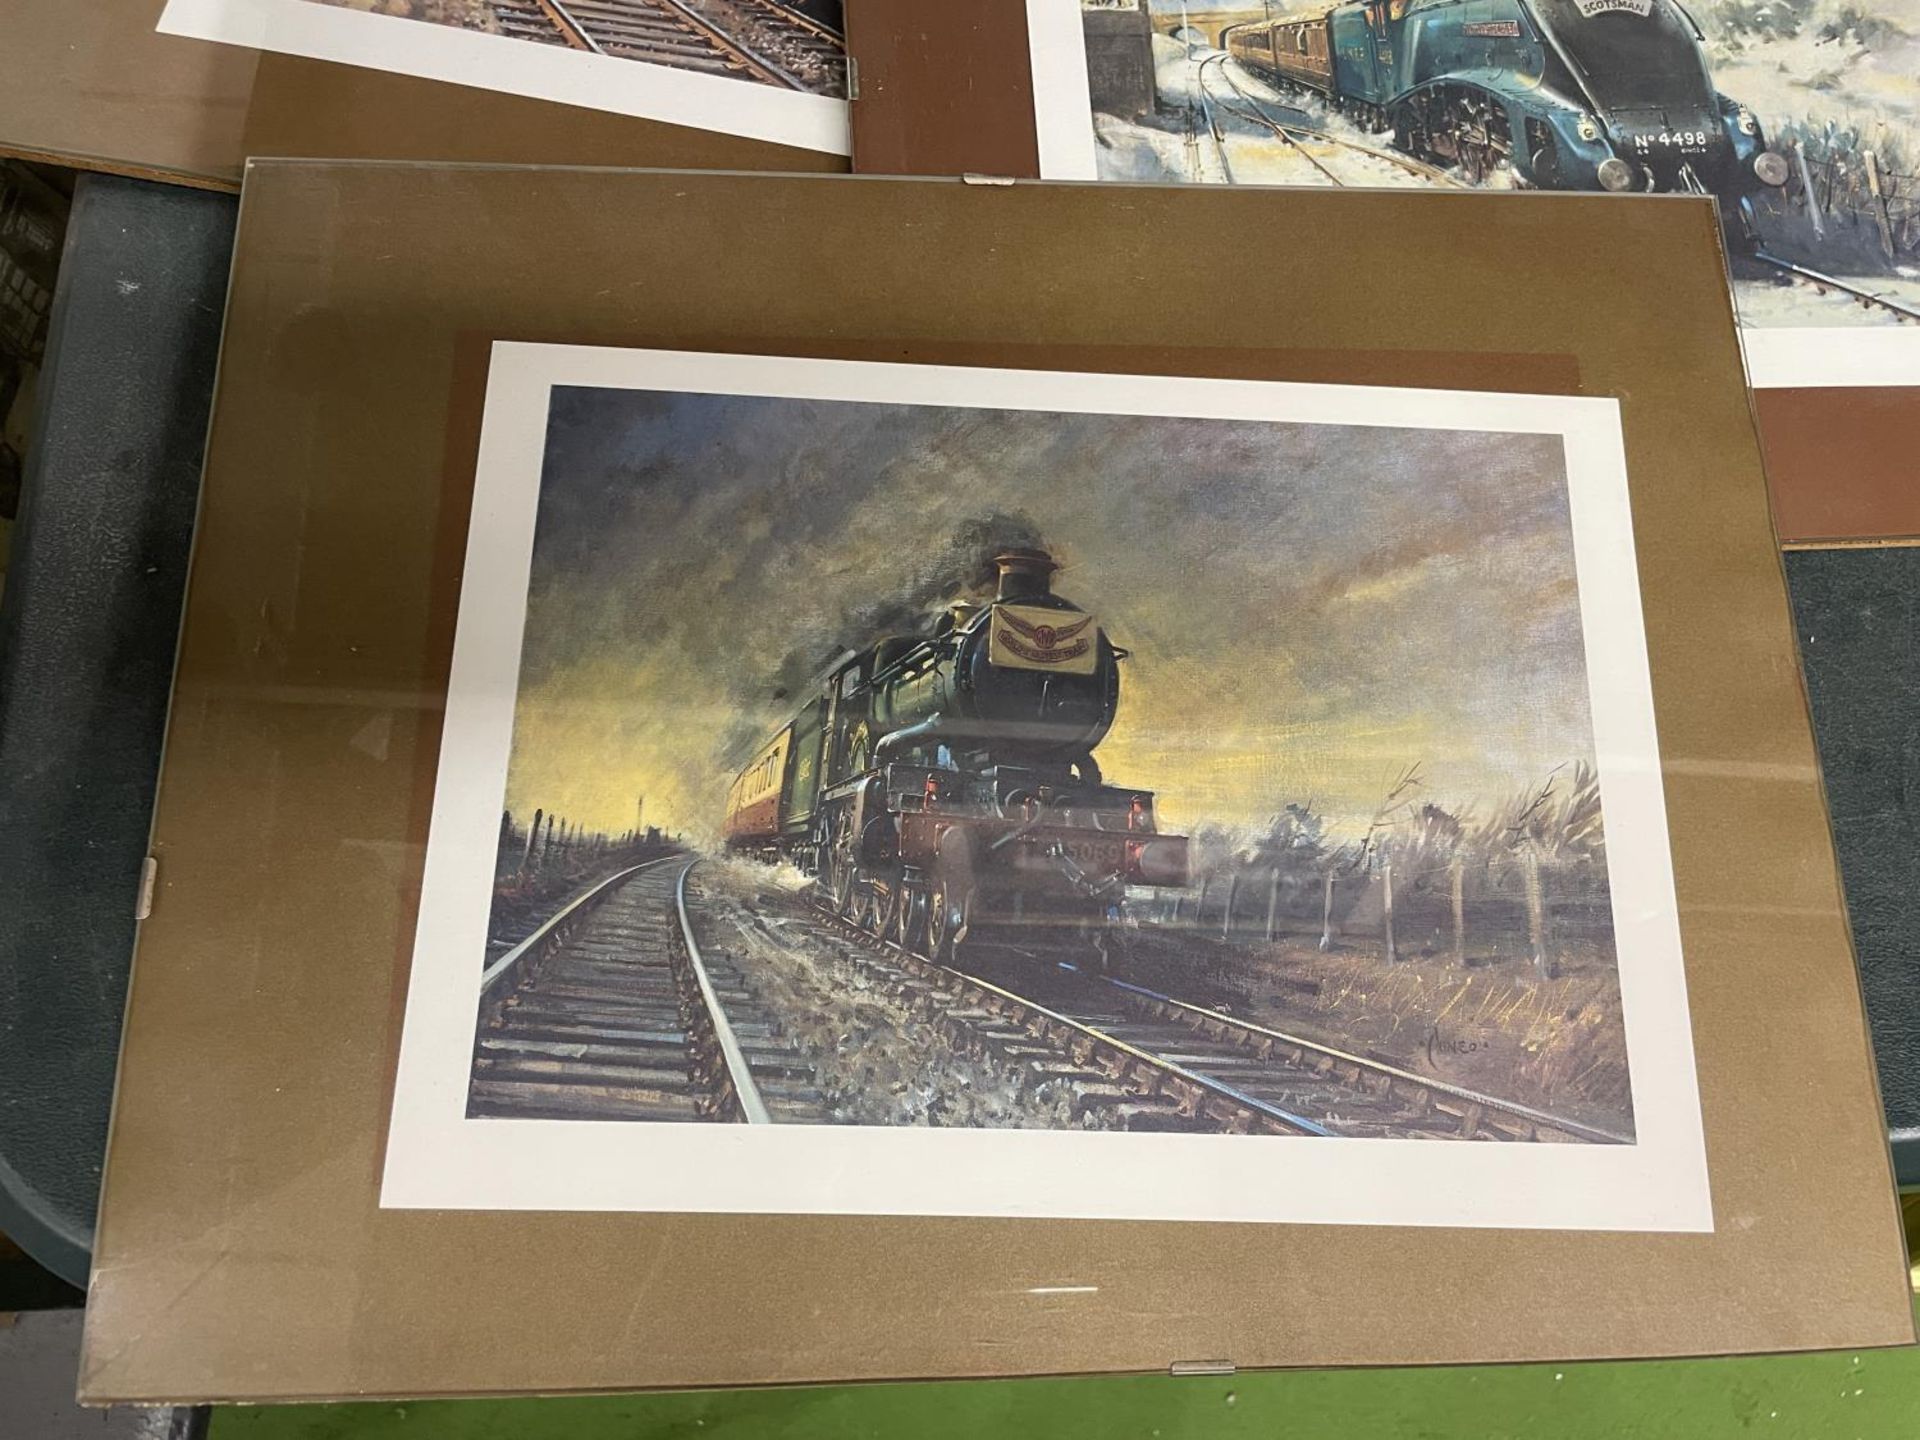 FIVE VINTAGE STYLE PRINTS OF STEAM ENGINES TO INCLUDE THE FLYING SCOTSMAN, GOLDEN AROW, ETC - Image 2 of 3